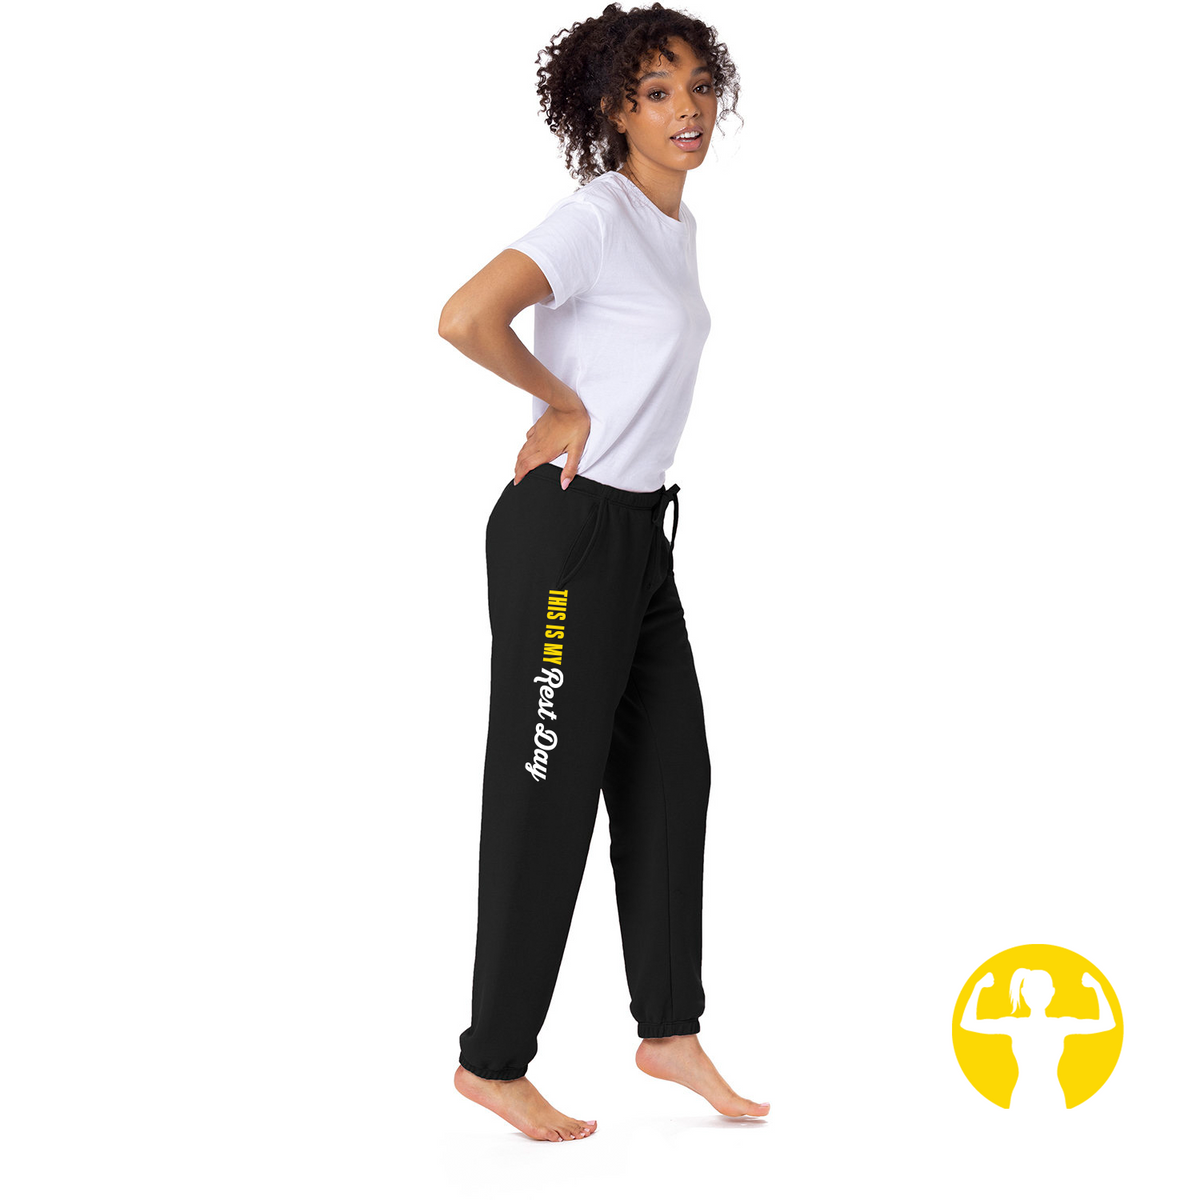 Women's Bottoms Available in Extended Sizes